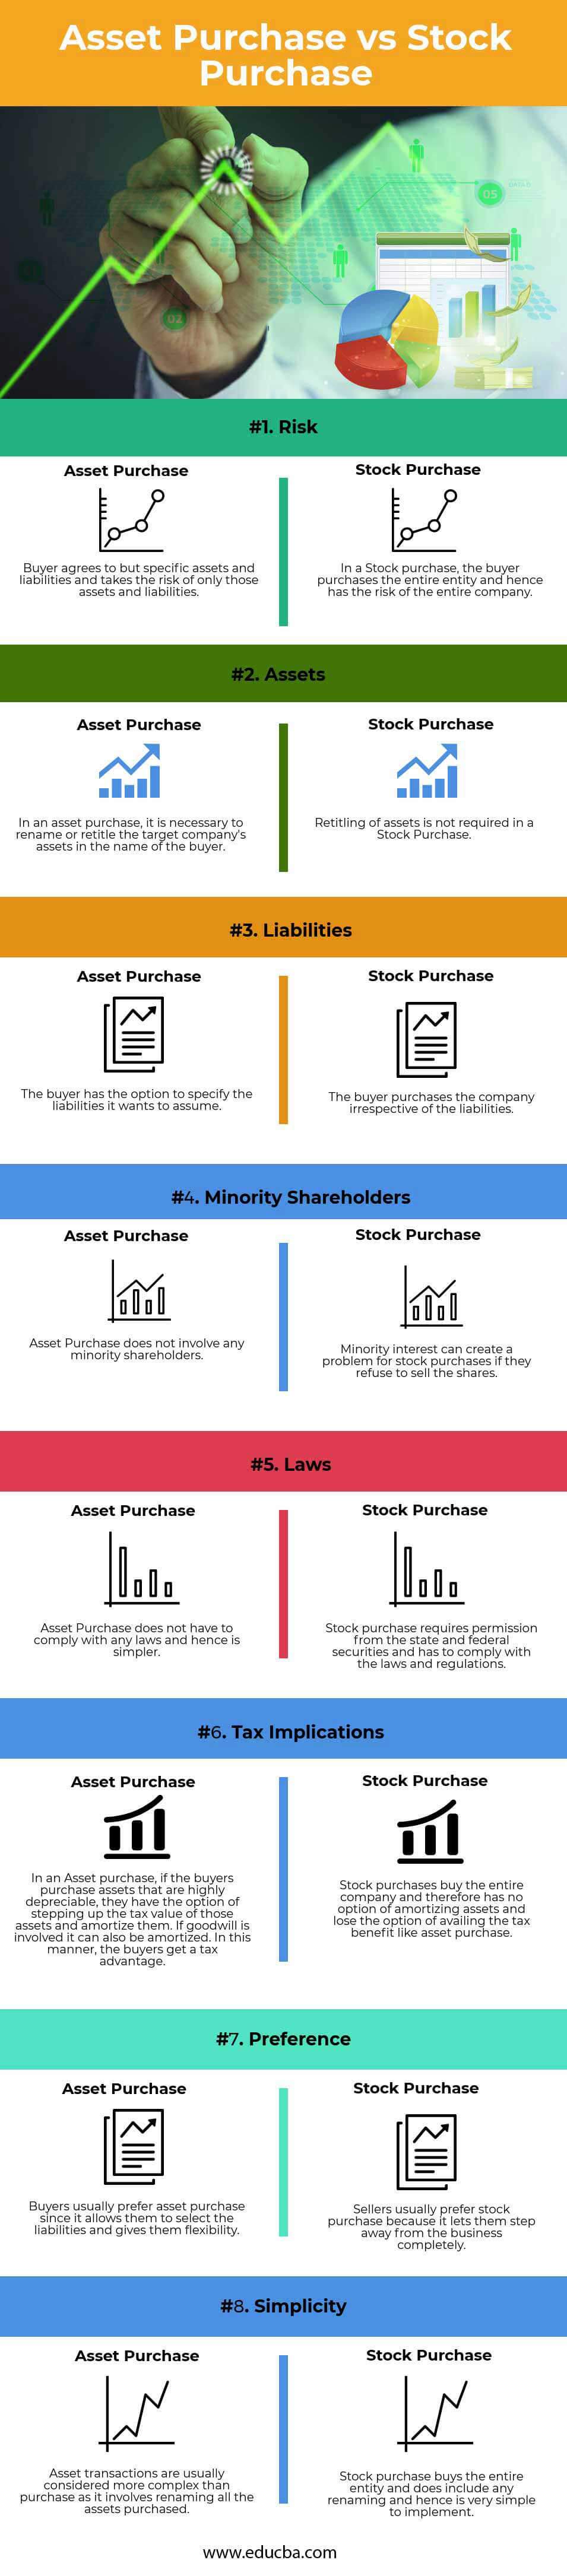 Asset-Purchase-vs-Stock-Purchase-info